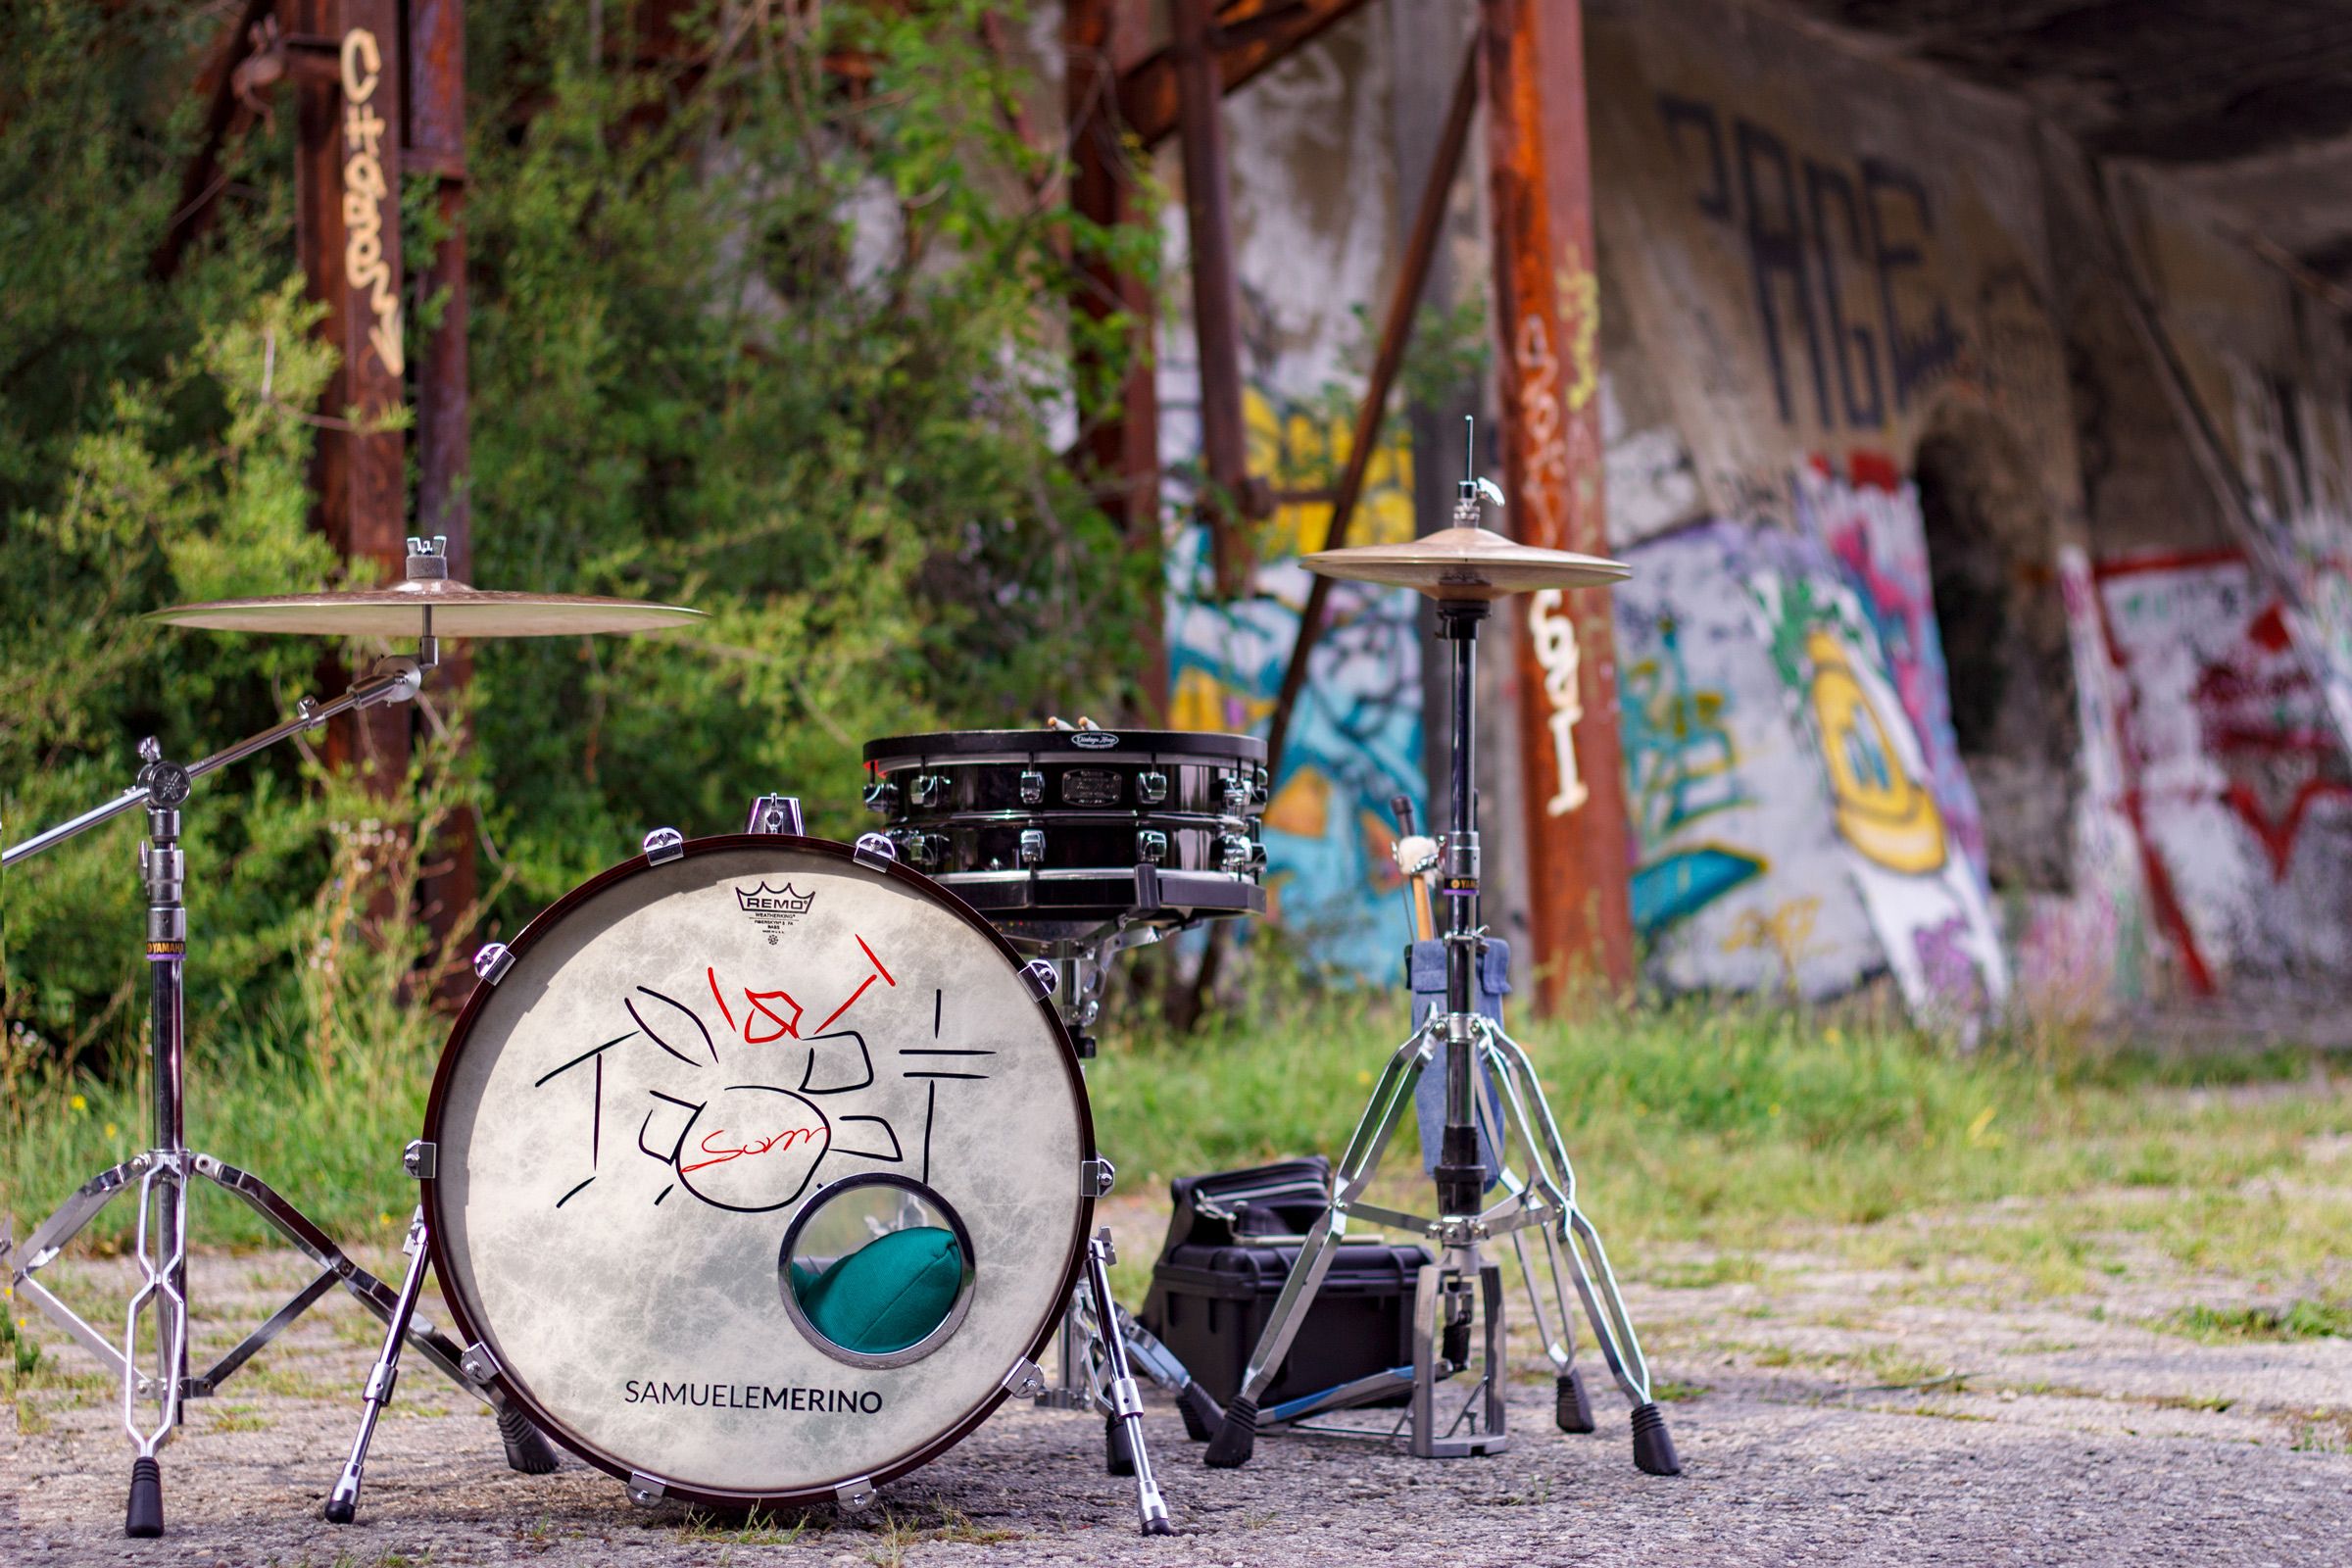 Drums and Graffiti